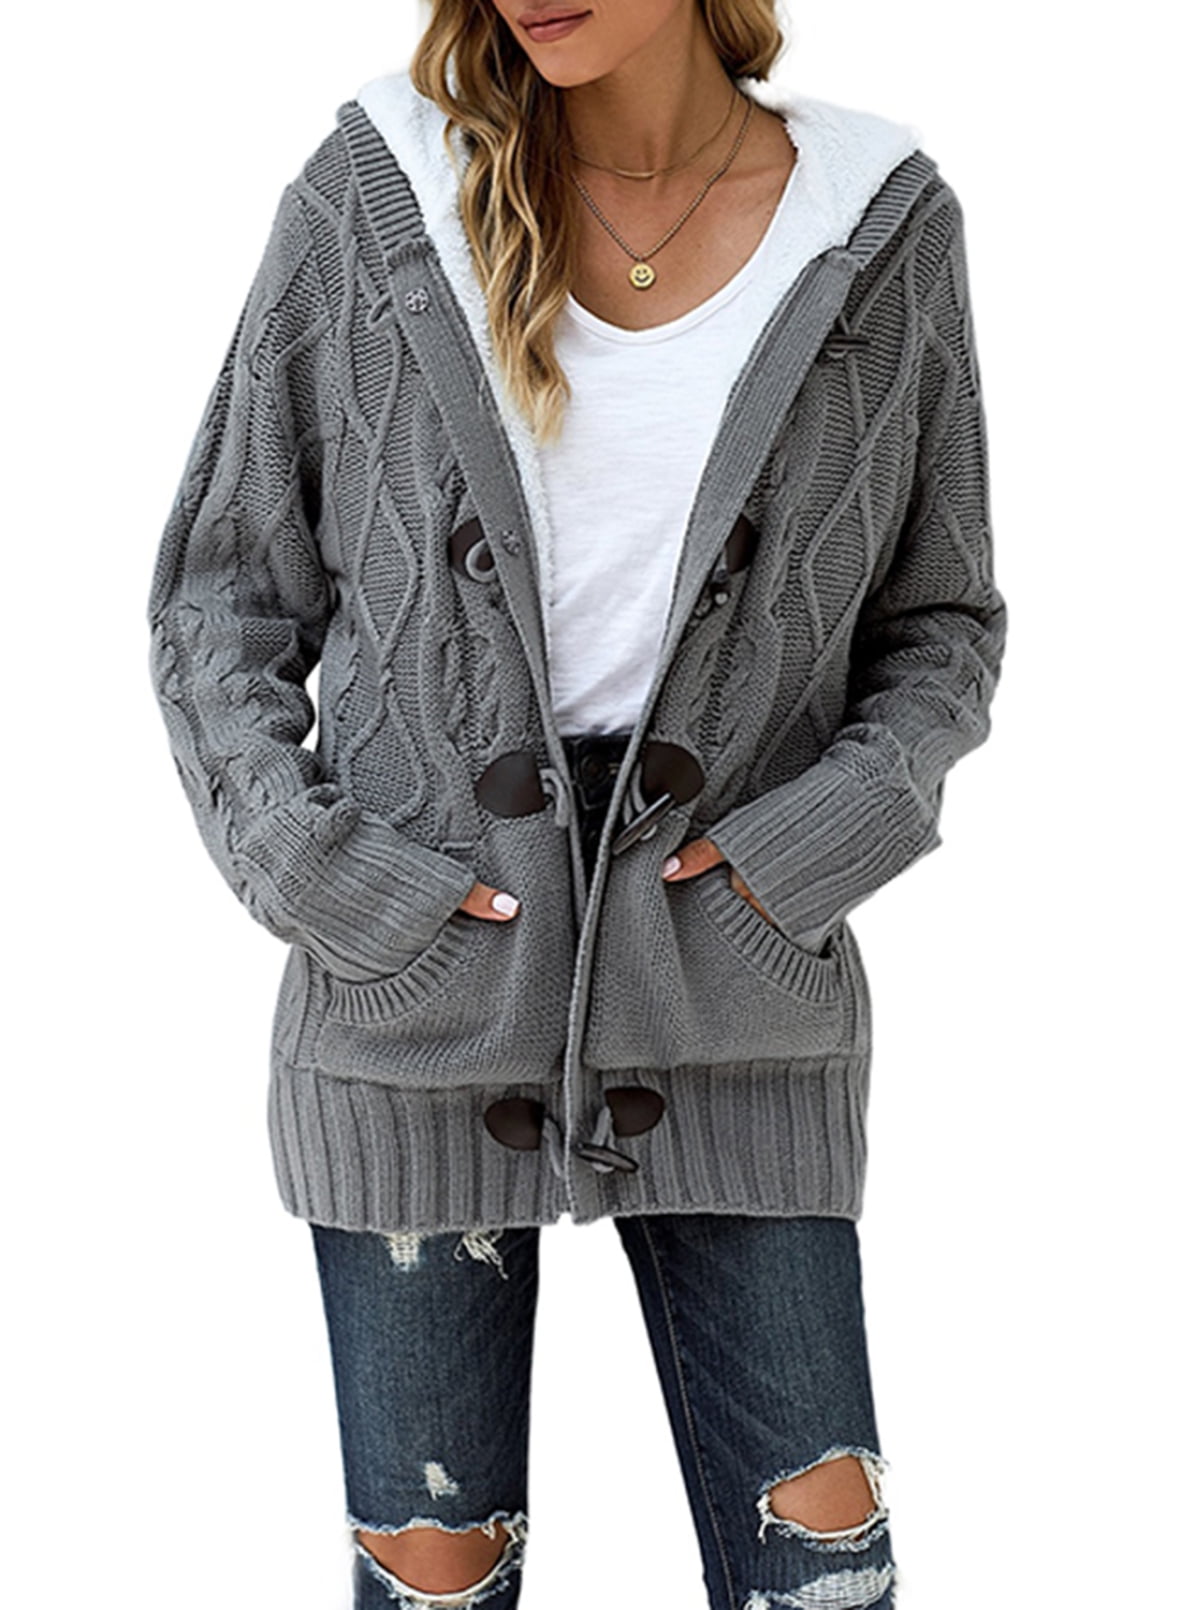 Aleumdr Womens Hooded Cardigans Casual Long Sleeve Button Up Cable Knit Sweater Coat Outwear with Pockets S-XXL